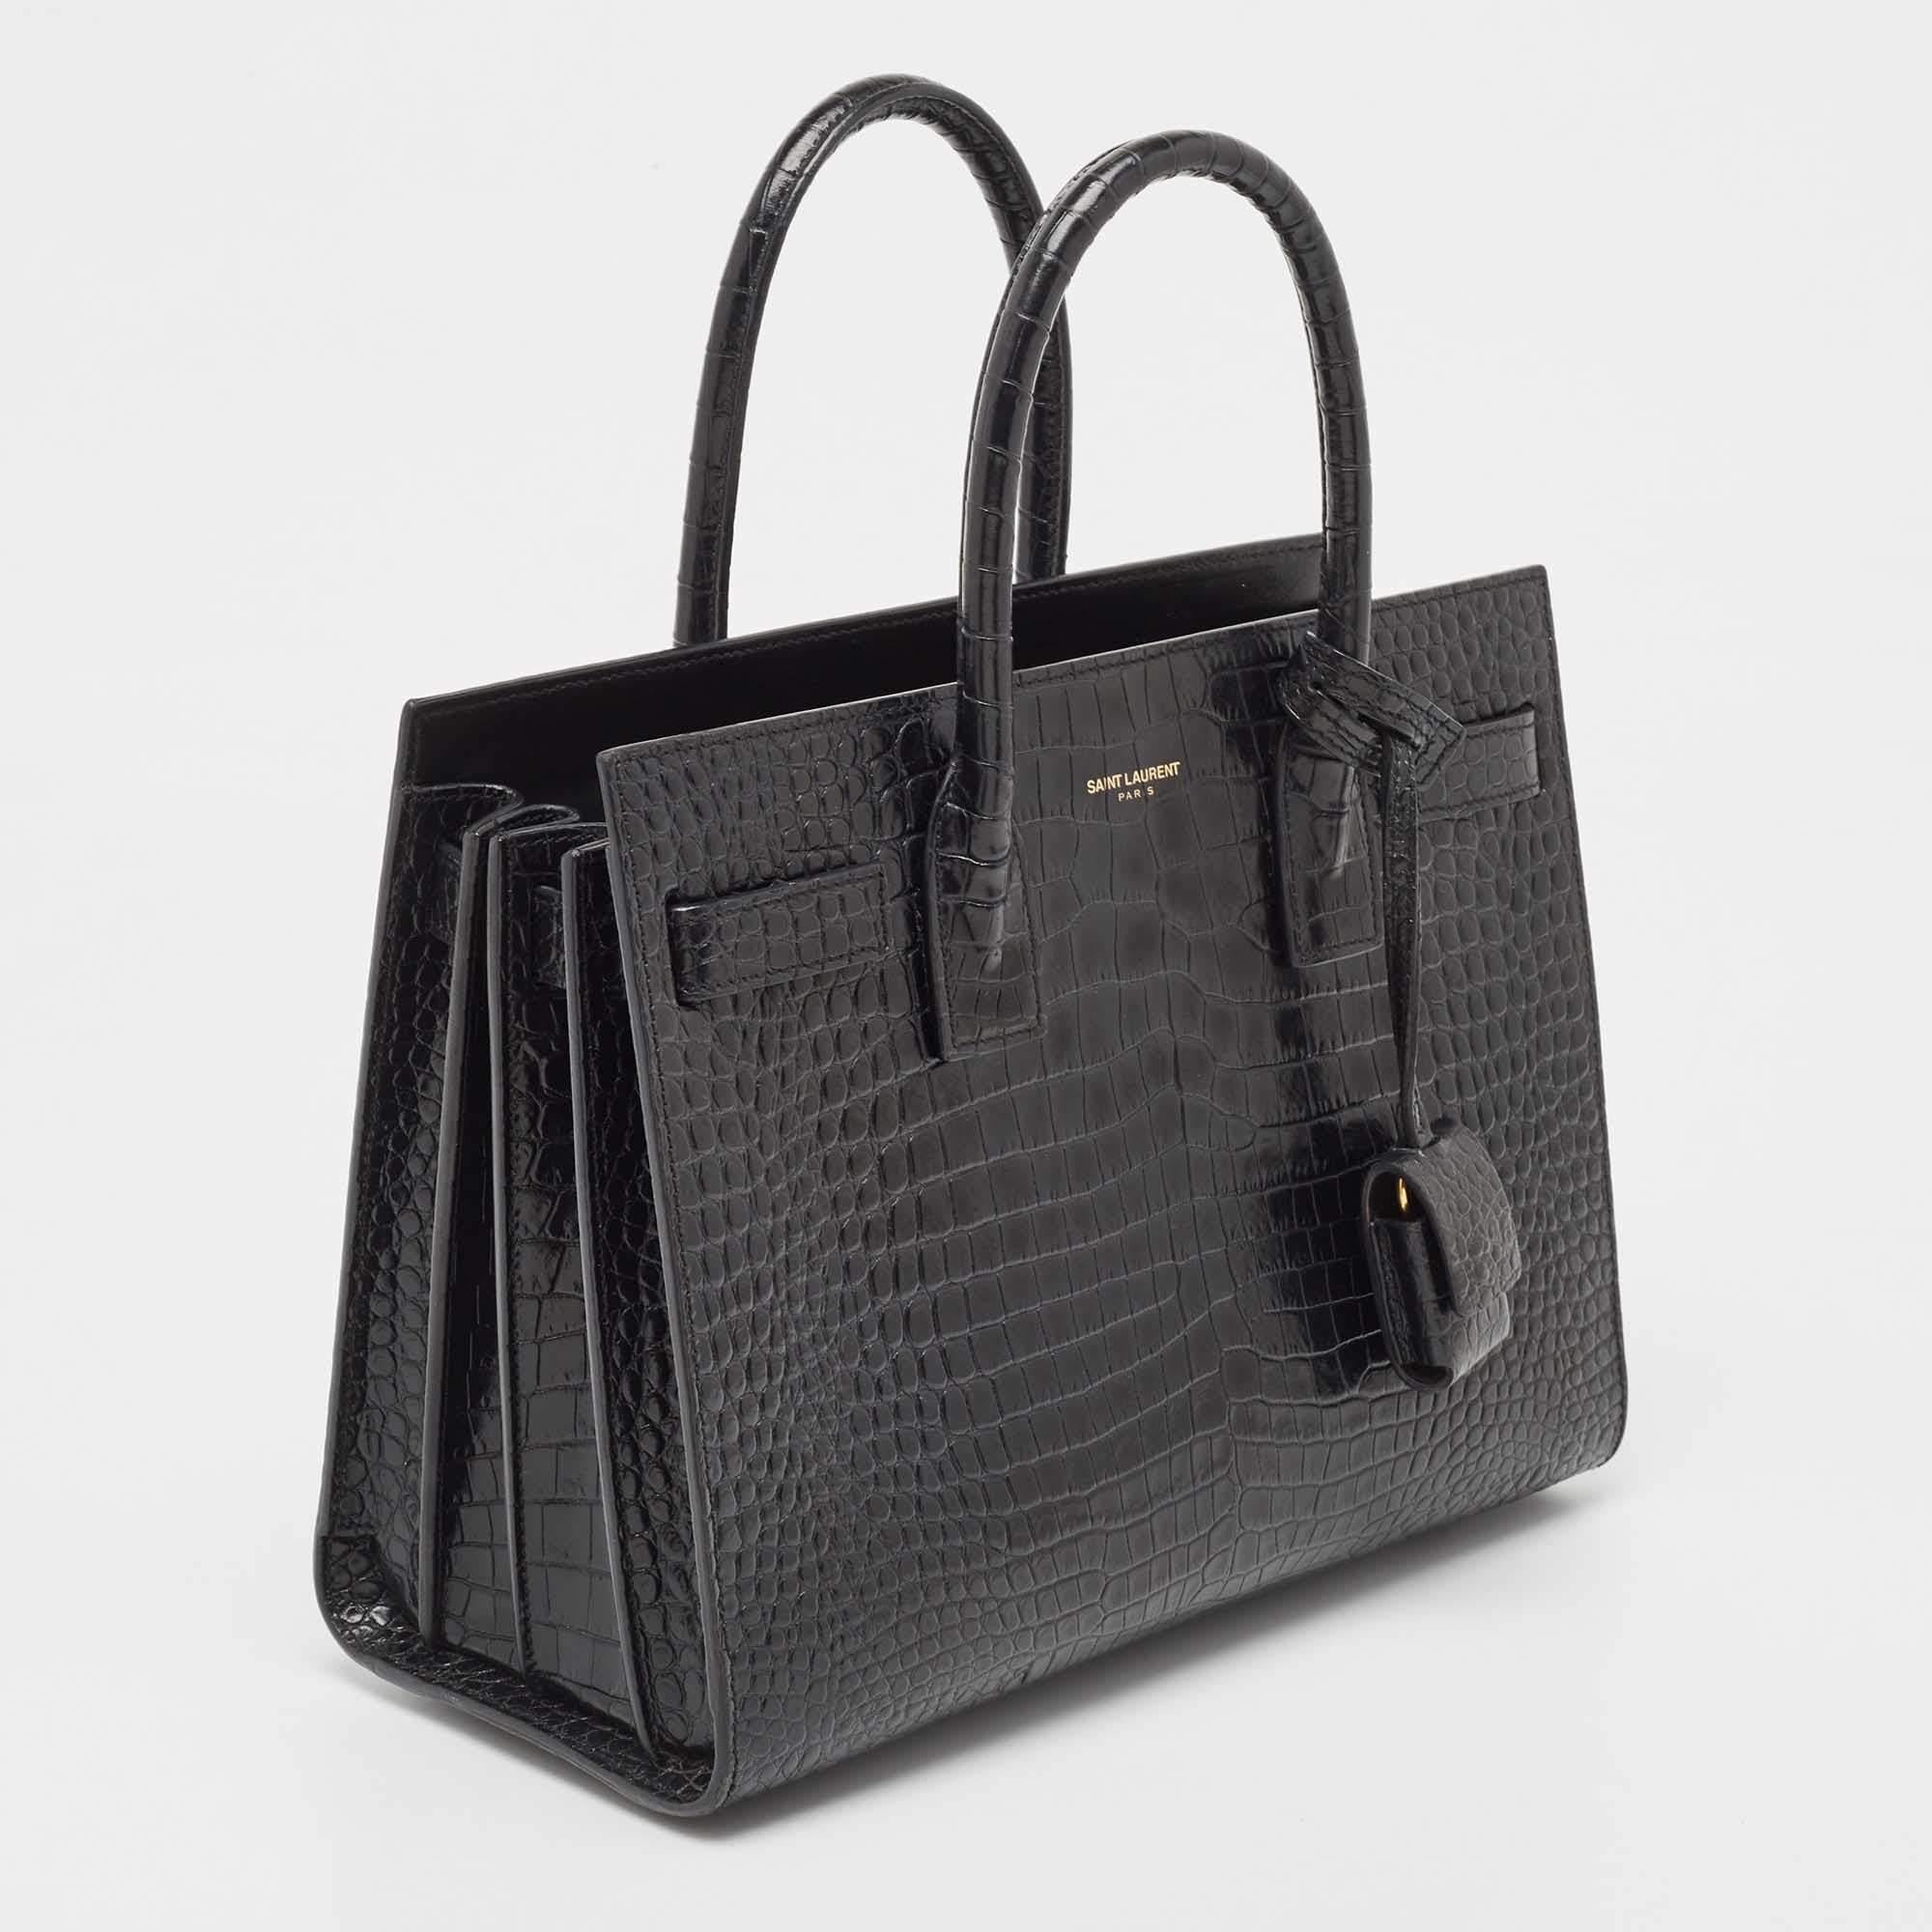 This Sac de Jour tote by Saint Laurent has a structure that simply spells sophistication. Crafted from black croc-embossed leather, the bag is held by double top handles. The tote comes with a leather-lined interior with enough space to store your